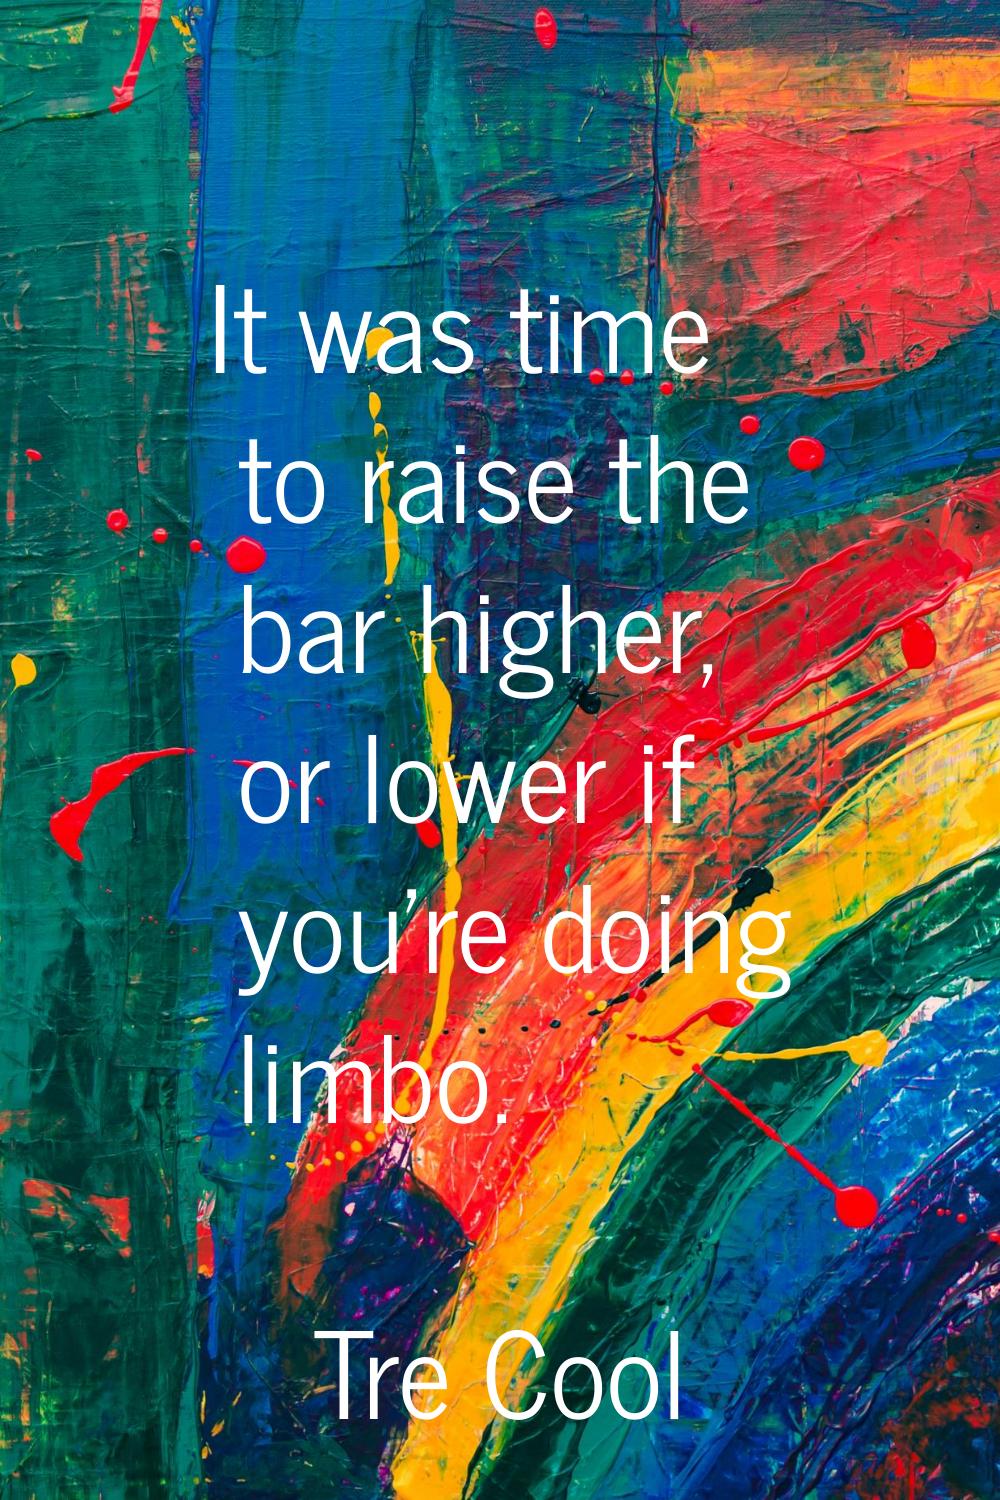 It was time to raise the bar higher, or lower if you're doing limbo.